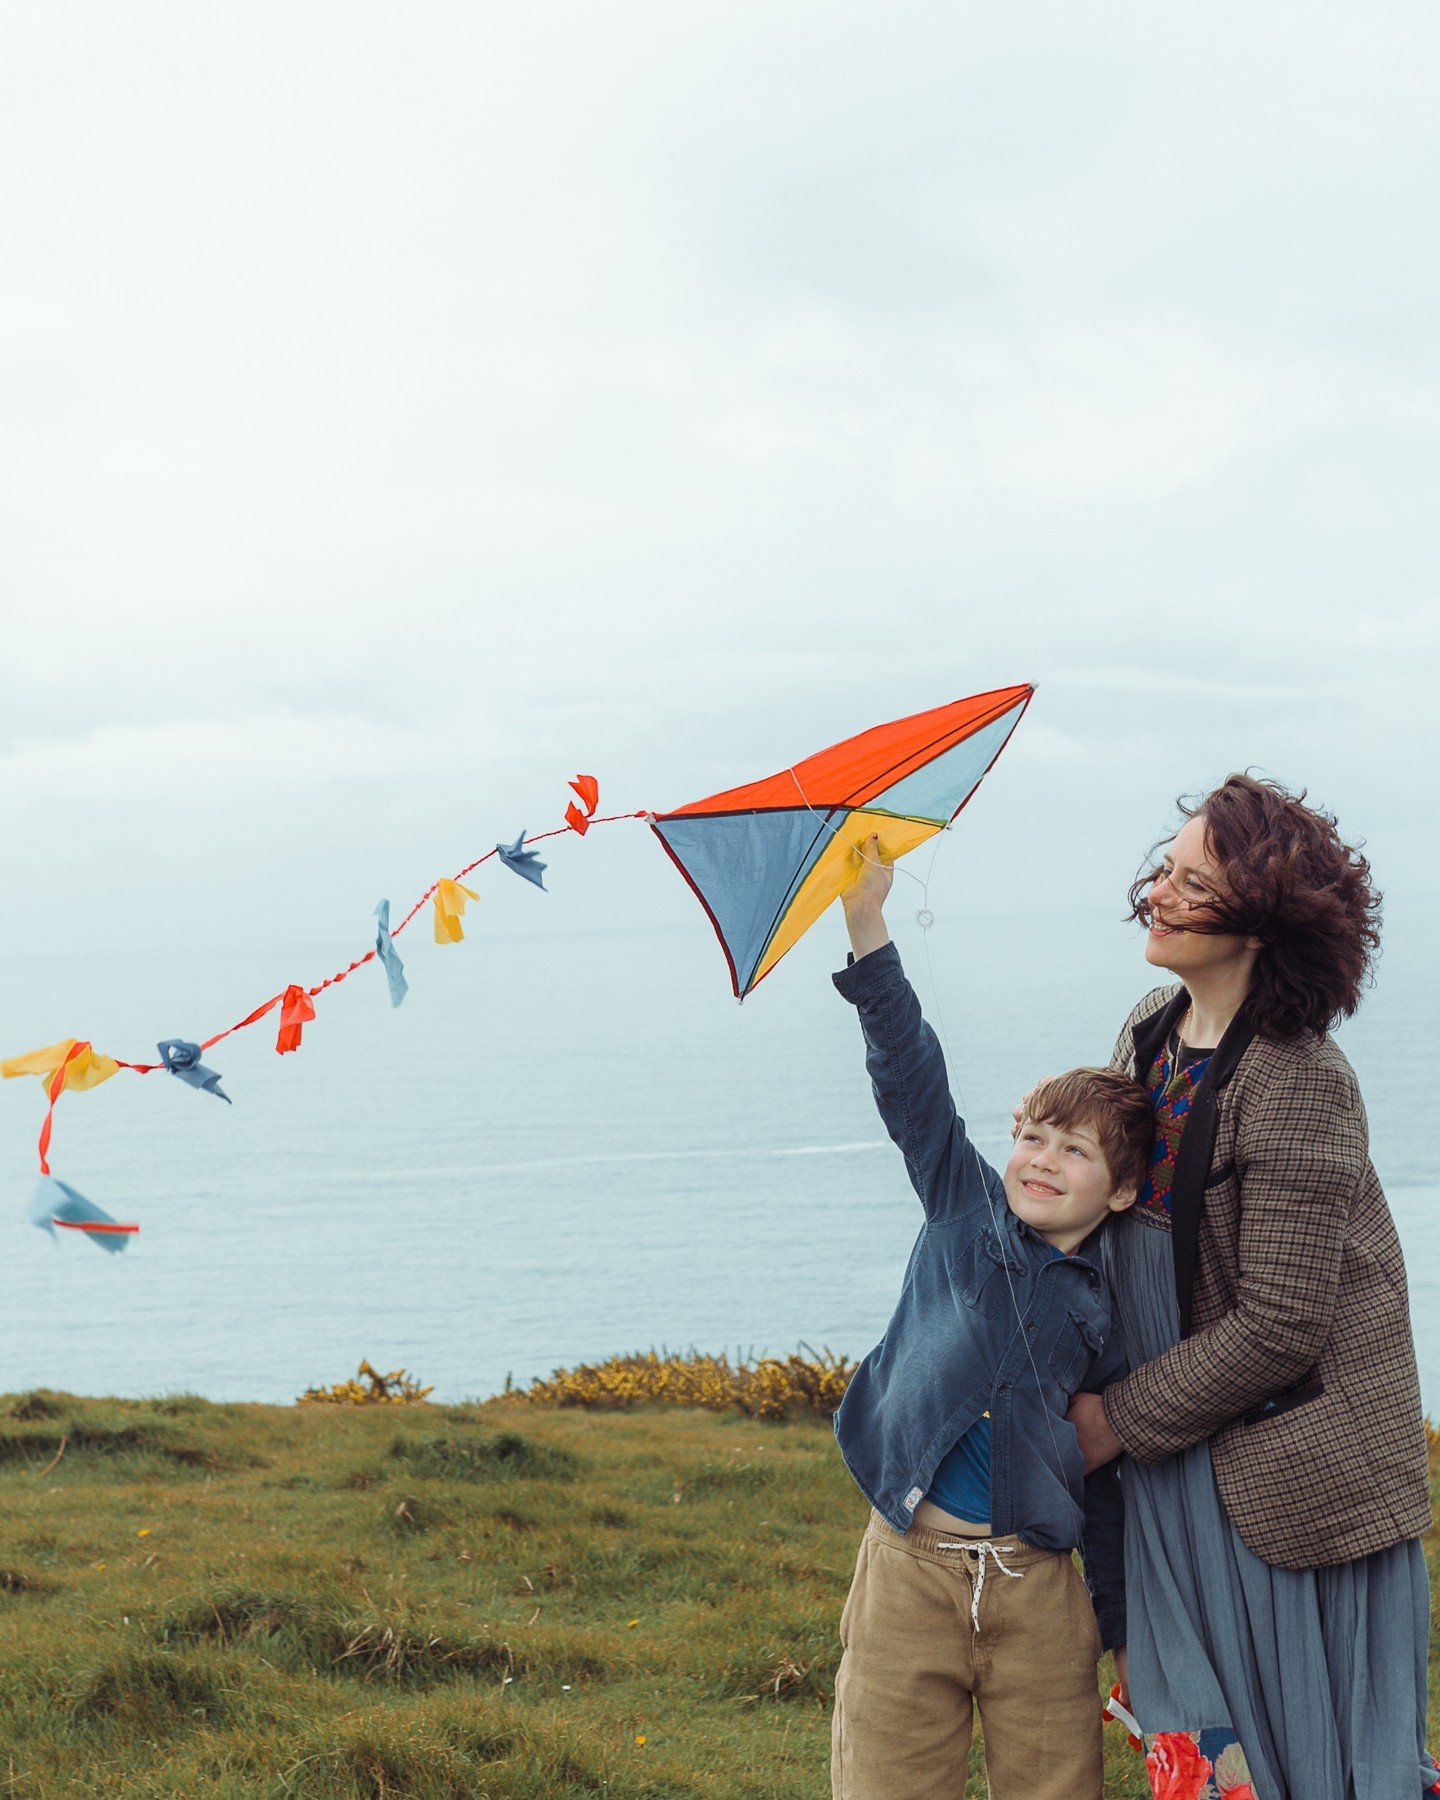 All the holiday fun down in Dorset last week and a little shoot-a-long and adventure with my buddy @helenamphotography
.
.
We ran, we played, we danced, we twirled, we flew (kites and pretend aeroplanes) and finally a big family cuddle just in time b